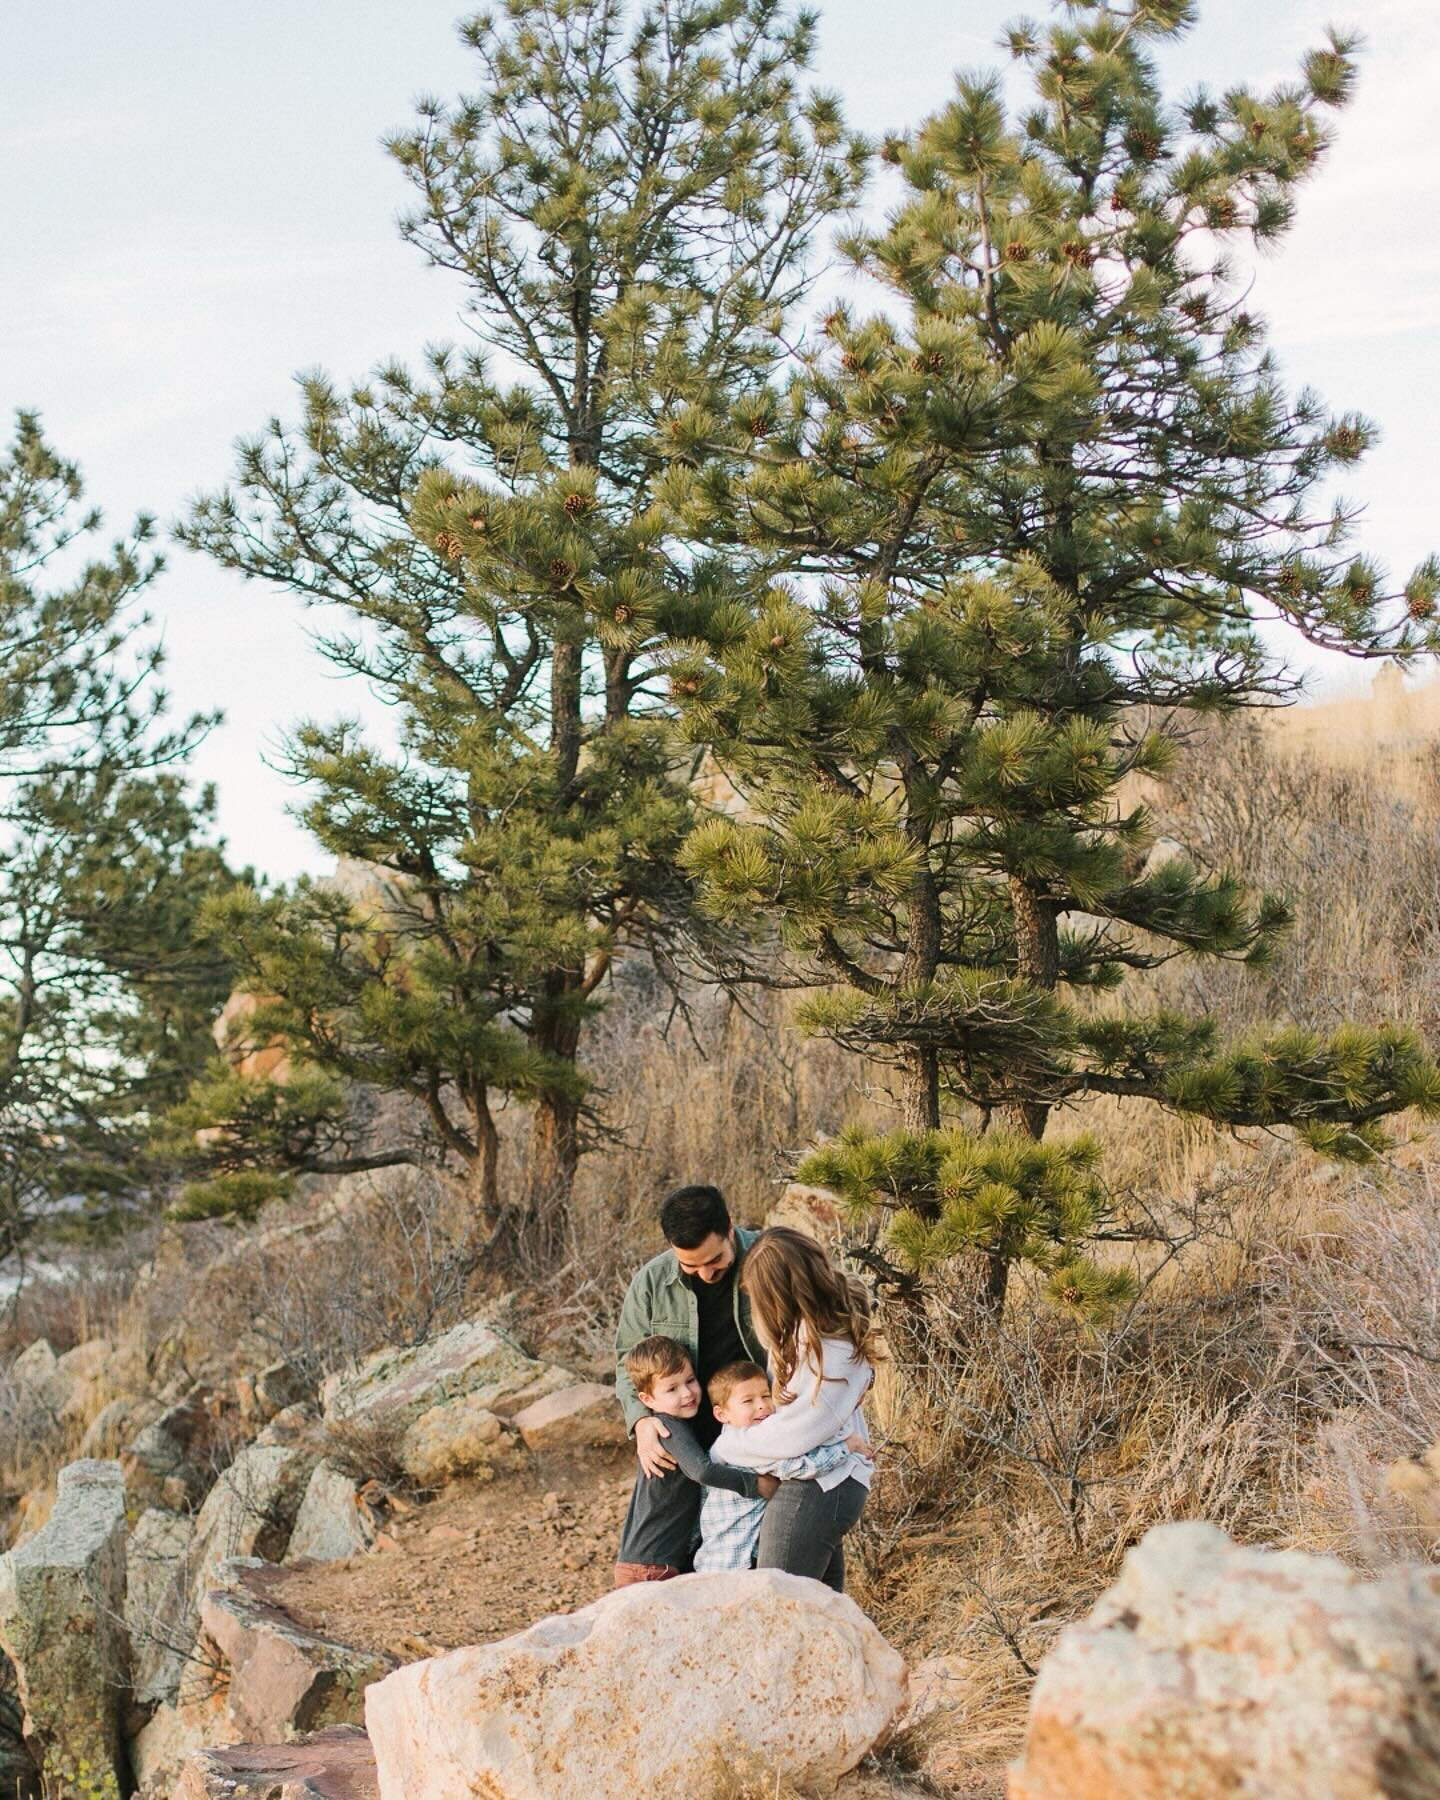 A sweet visit with college friends and some of my oldest clients. It&rsquo;s been such a privilege to shoot their wedding, maternity, newborn and now family sessions. 🫶🏻

&mdash;&mdash;

#focophotographer #fortcollinsphotographer #northerncoloradop